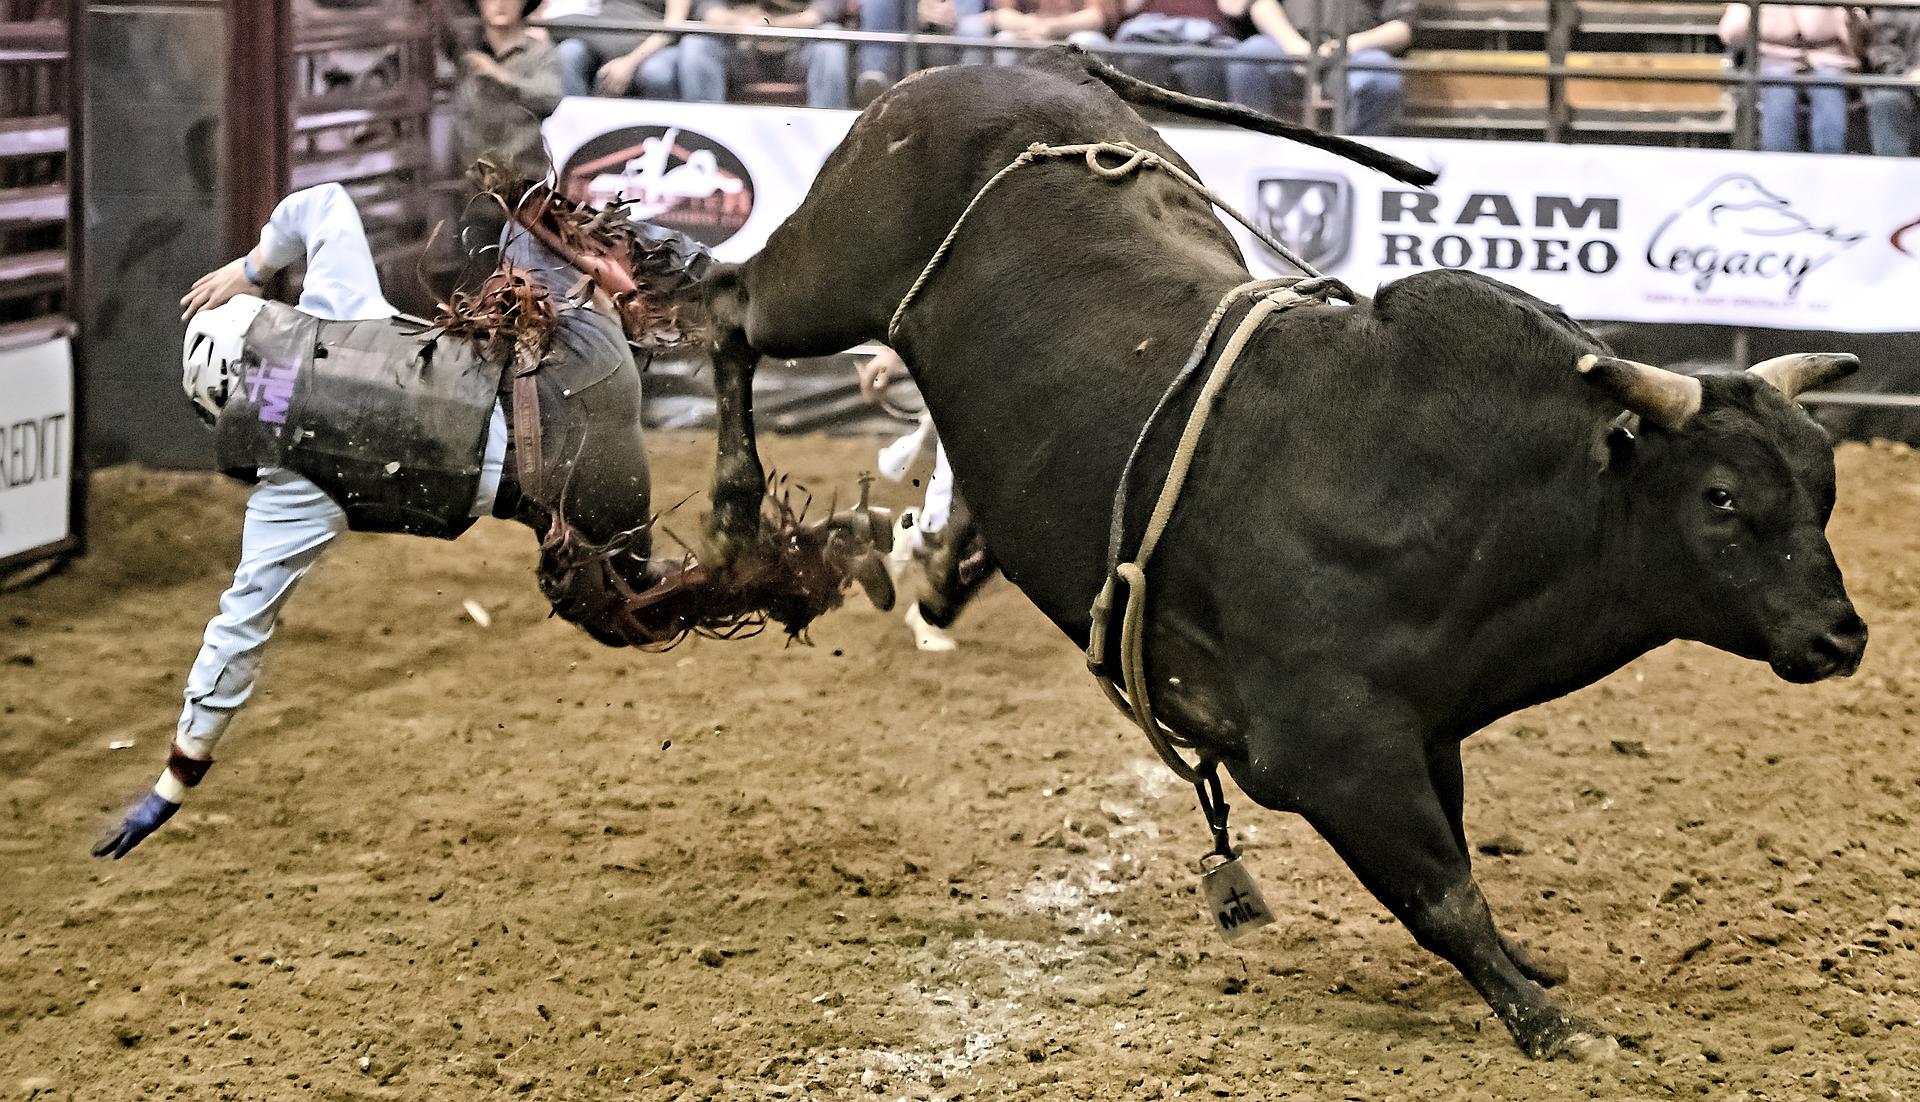 Image of a man being bucked off a bull